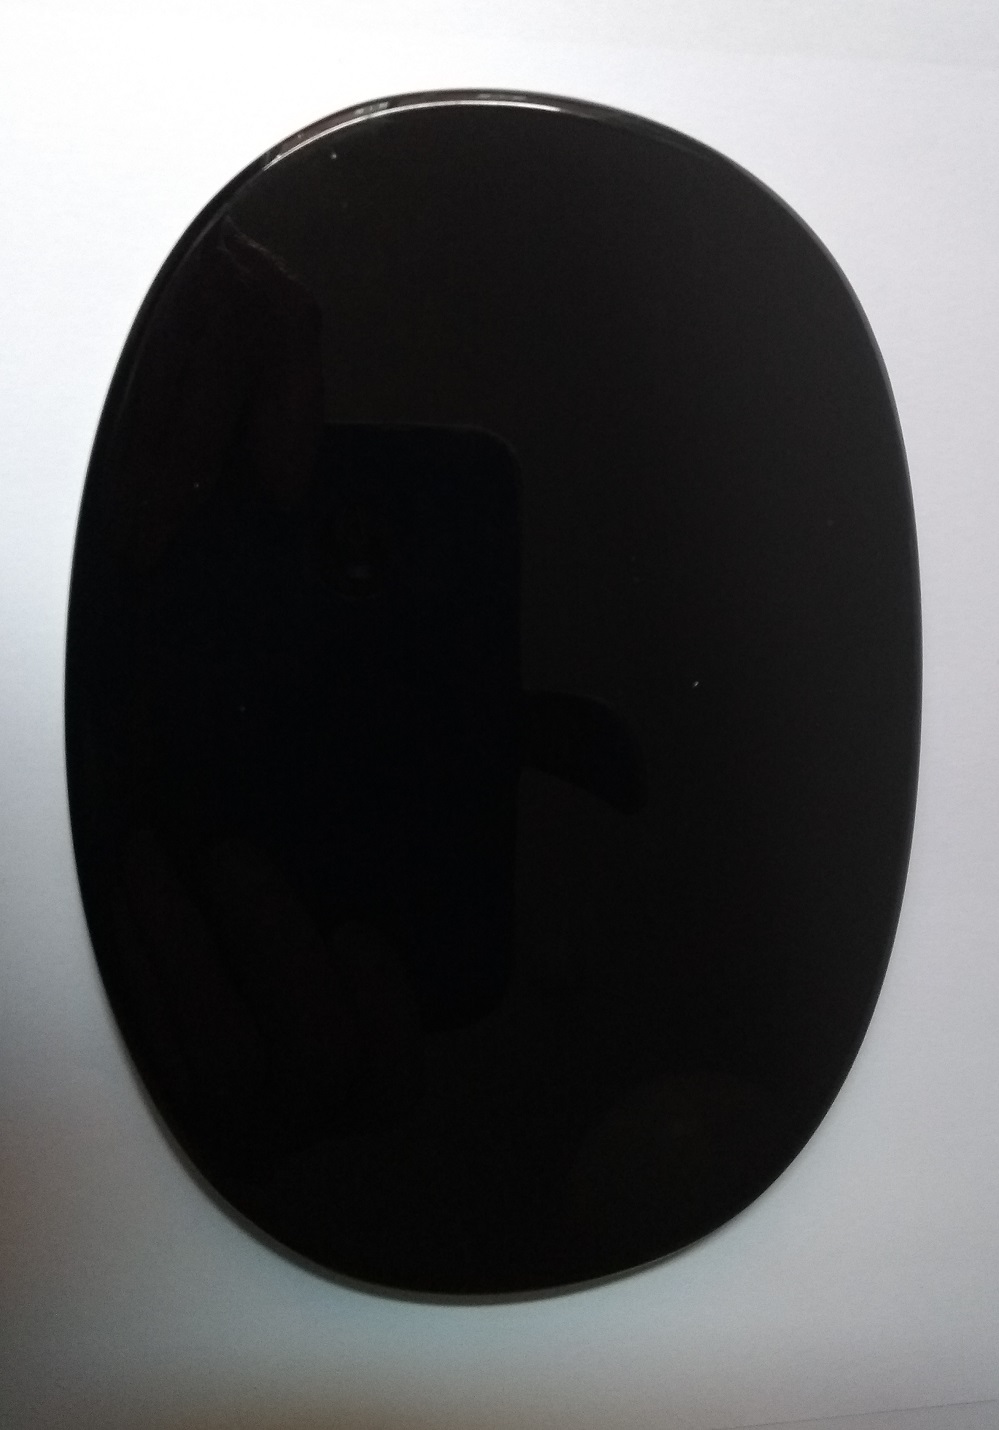 Black Obsidian Scrying Mirror (Magick Mirror) Oval 5.6 Inch by 4 Inch No 198